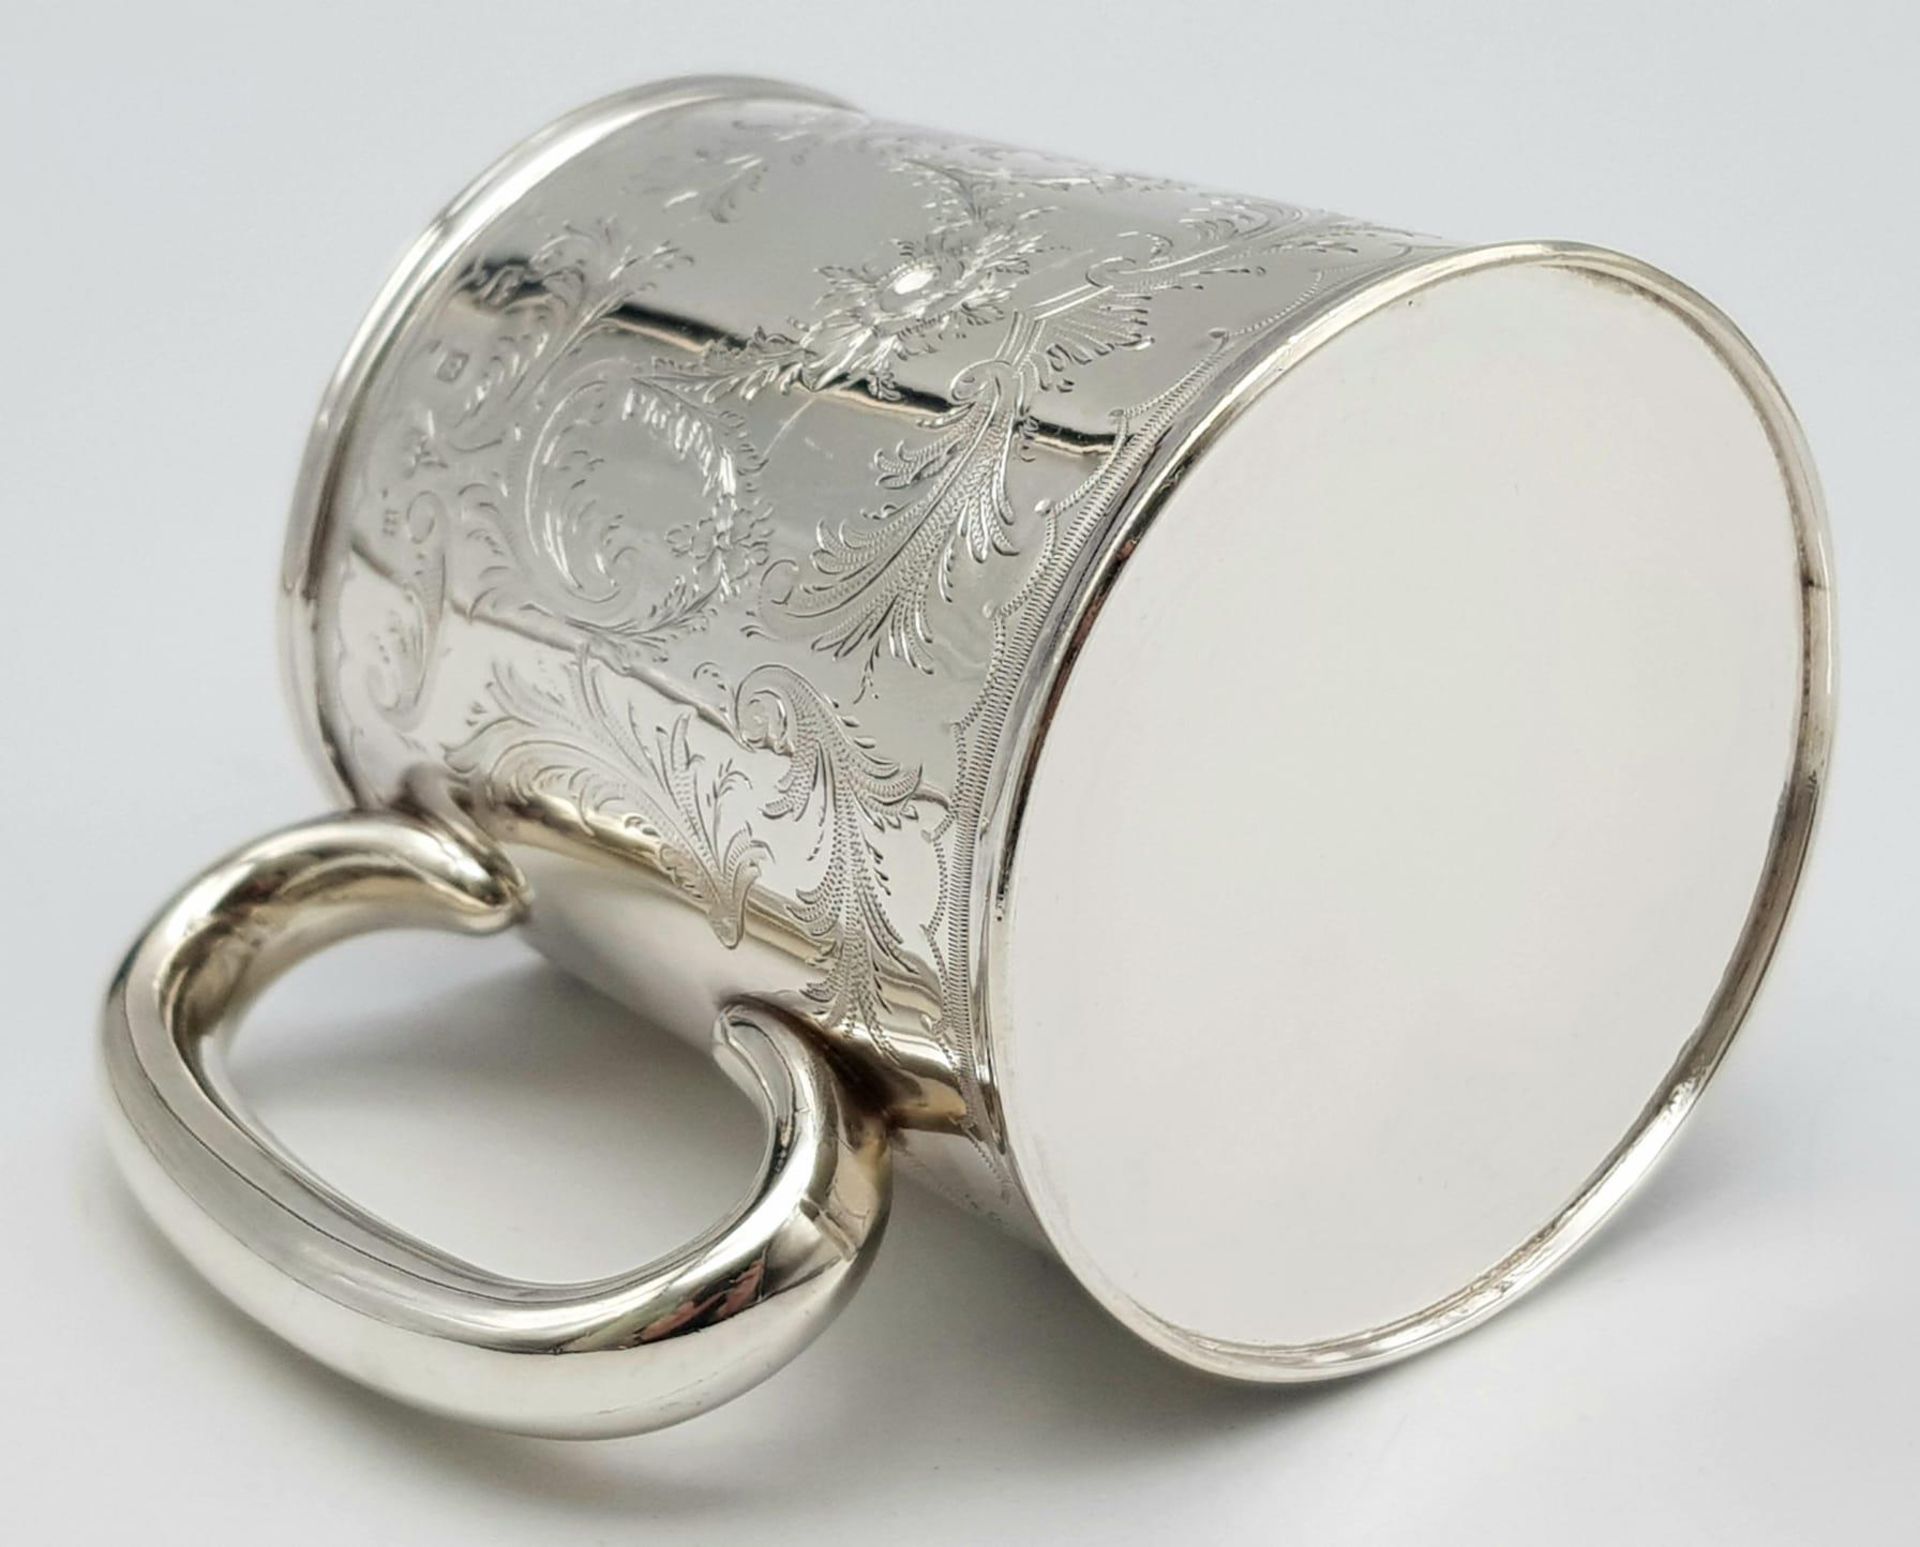 AN ANTIQUE SILVER TANKARD INSCRIBED "PHILIP OCTOBER 23rd 1894" ALL HAND ENGRAVED BY A MASTER - Image 6 of 8